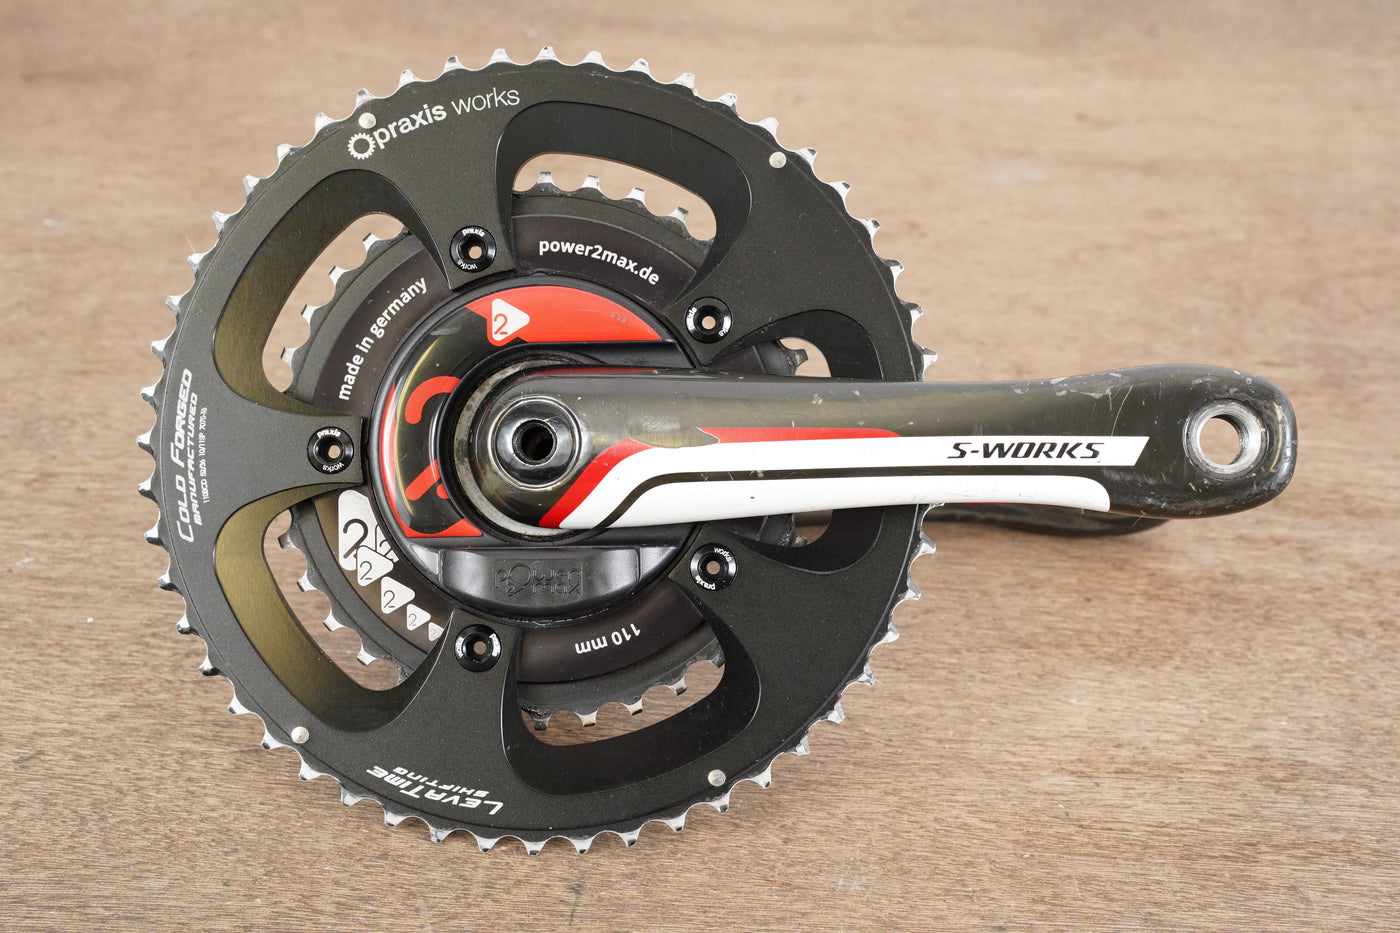 172.5mm 52/36T BB30 Specialized S-WORKS Power2Max Power Meter Crankset